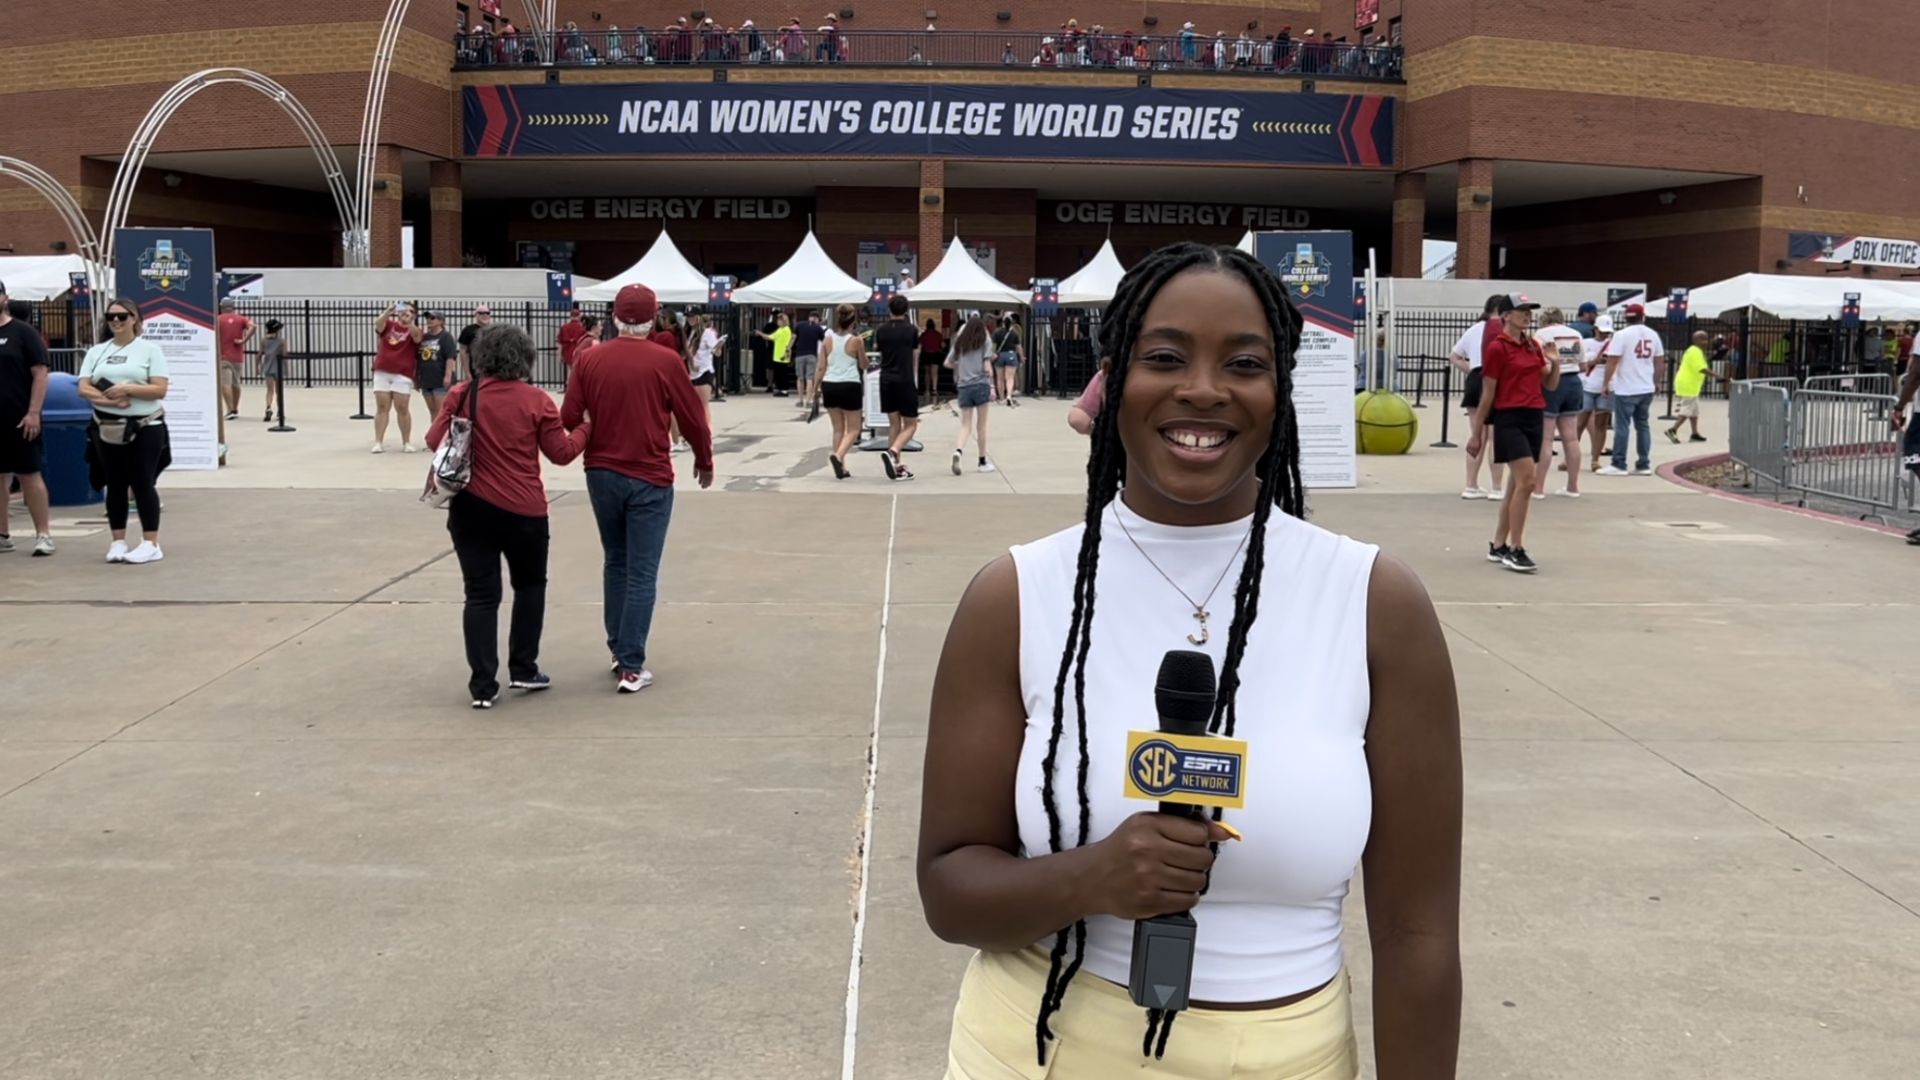 SEC fans share excitement for WCWS atmosphere